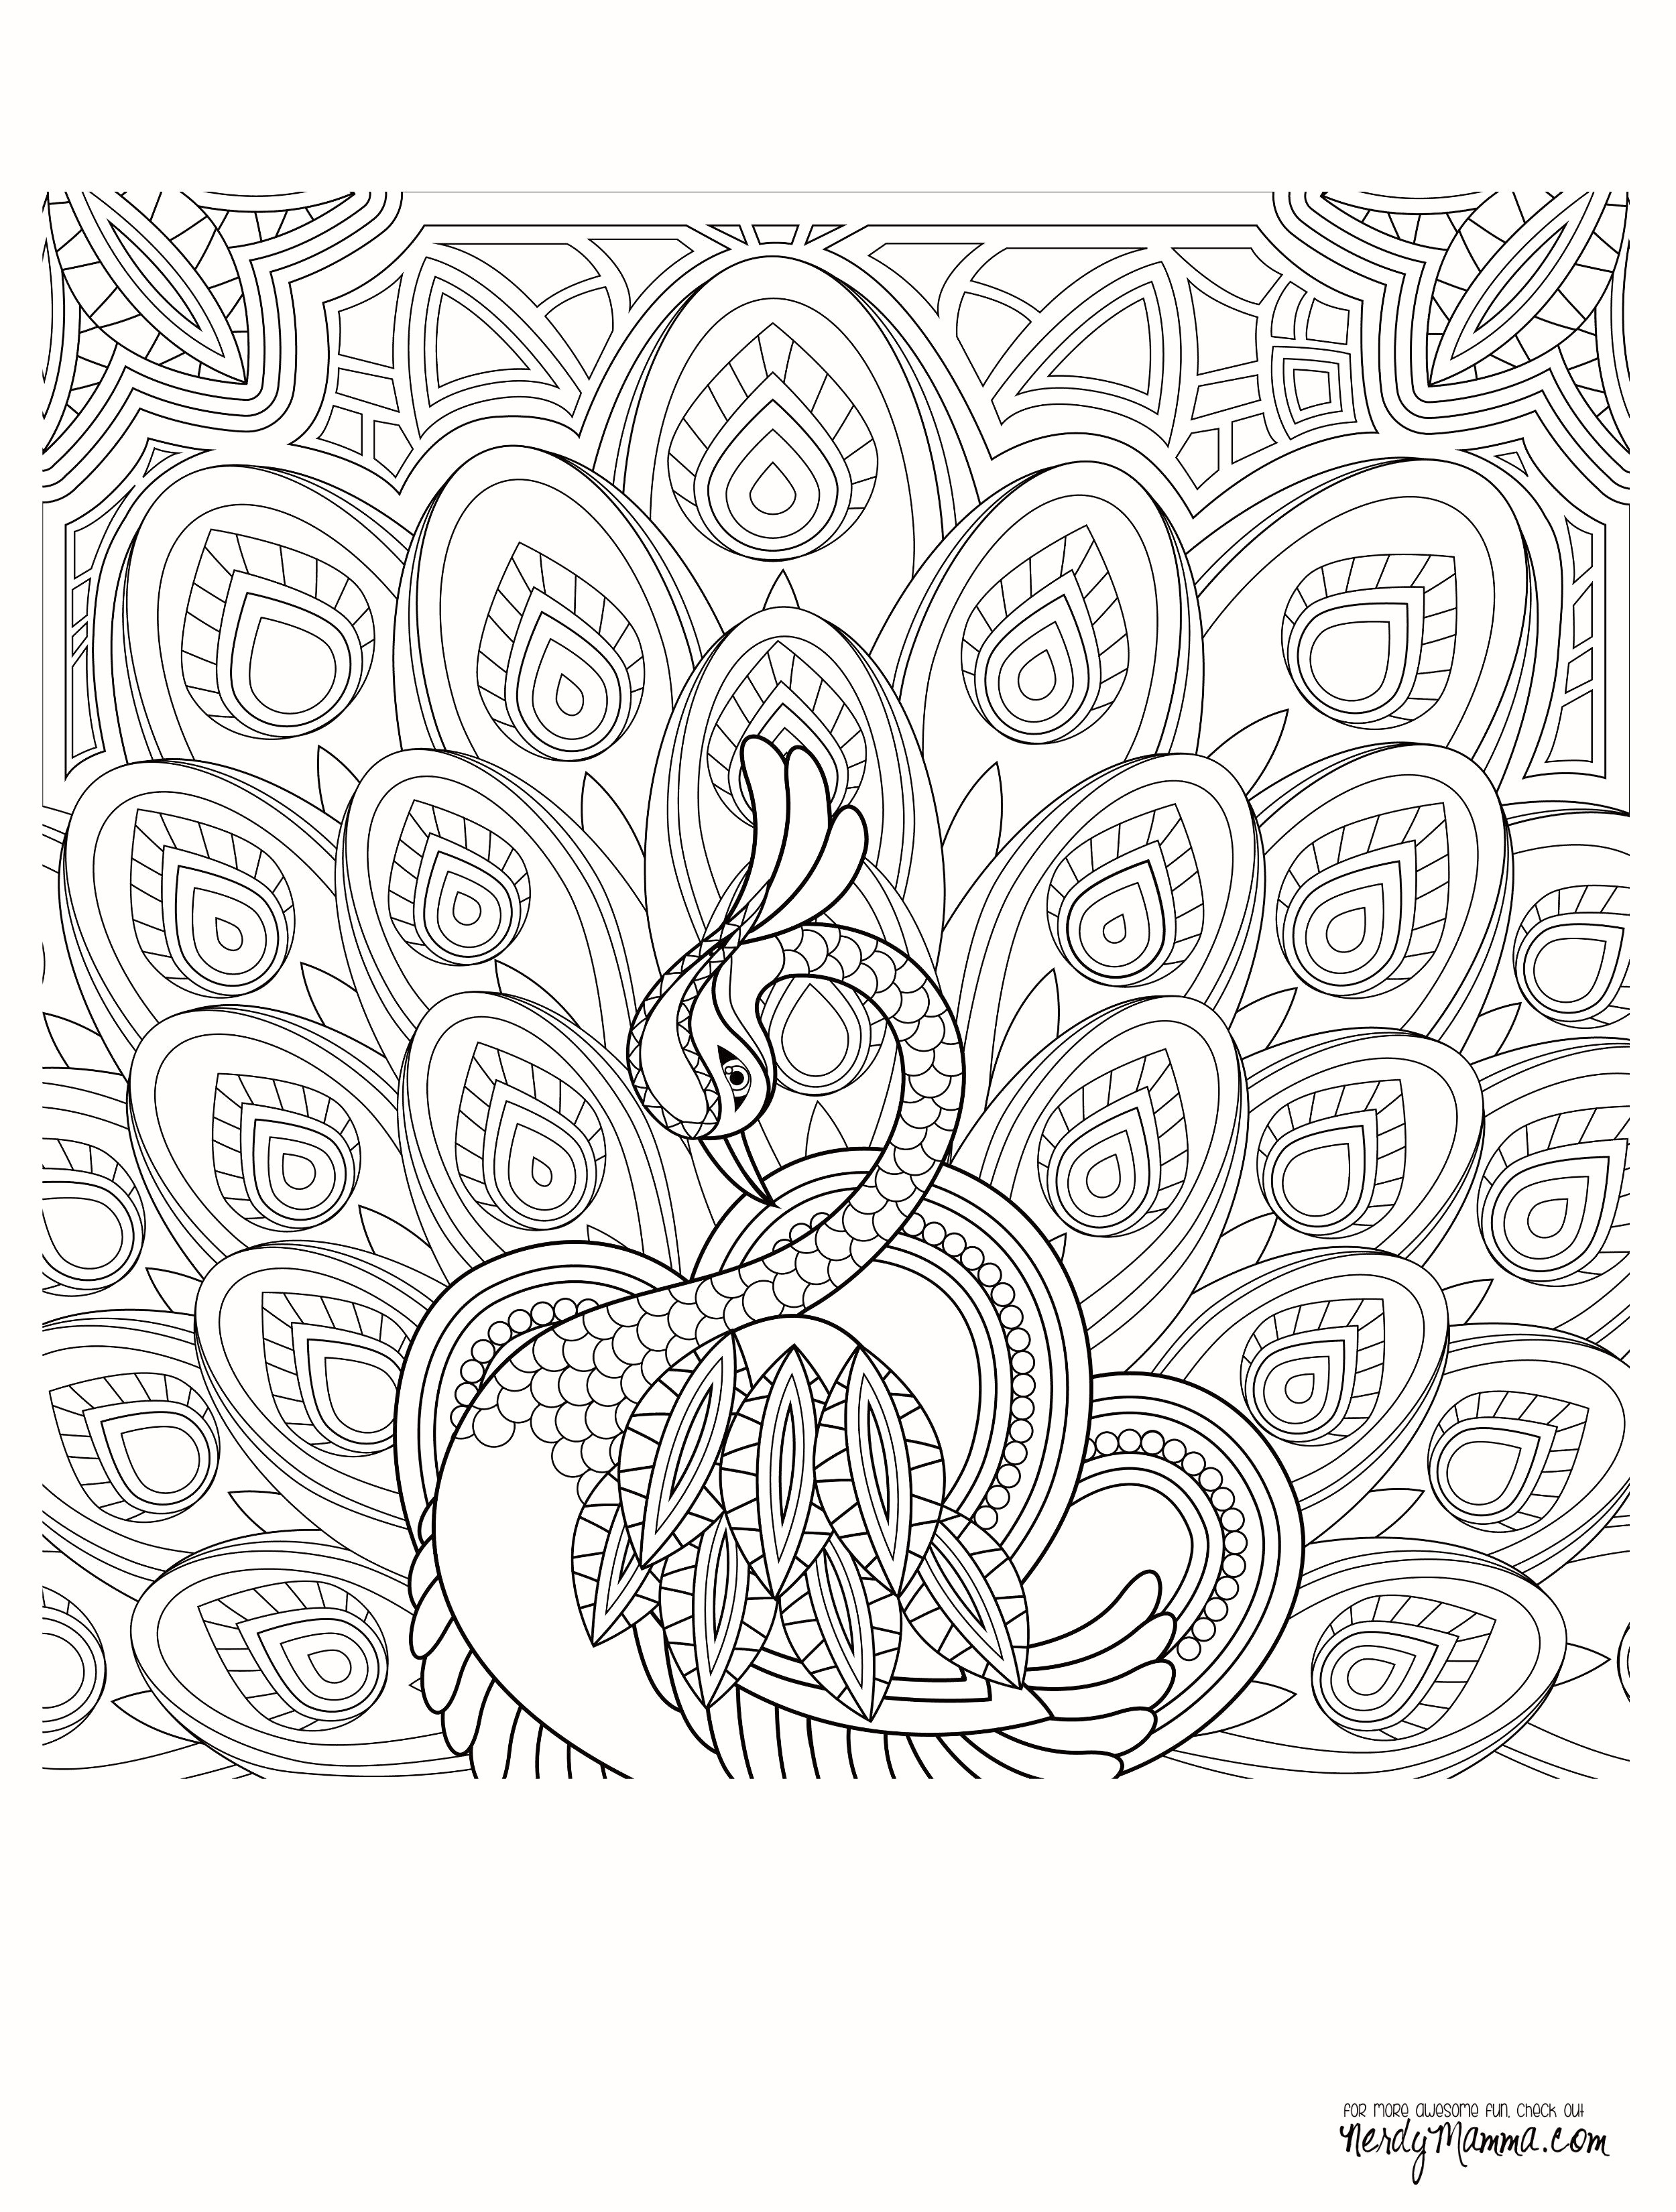 12 Famous Picture Of A Flower Vase to Color 2024 free download picture of a flower vase to color of flowers coloring pages luxury cool vases flower vase coloring page intended for flowers coloring pages luxury cool vases flower vase coloring page pages 